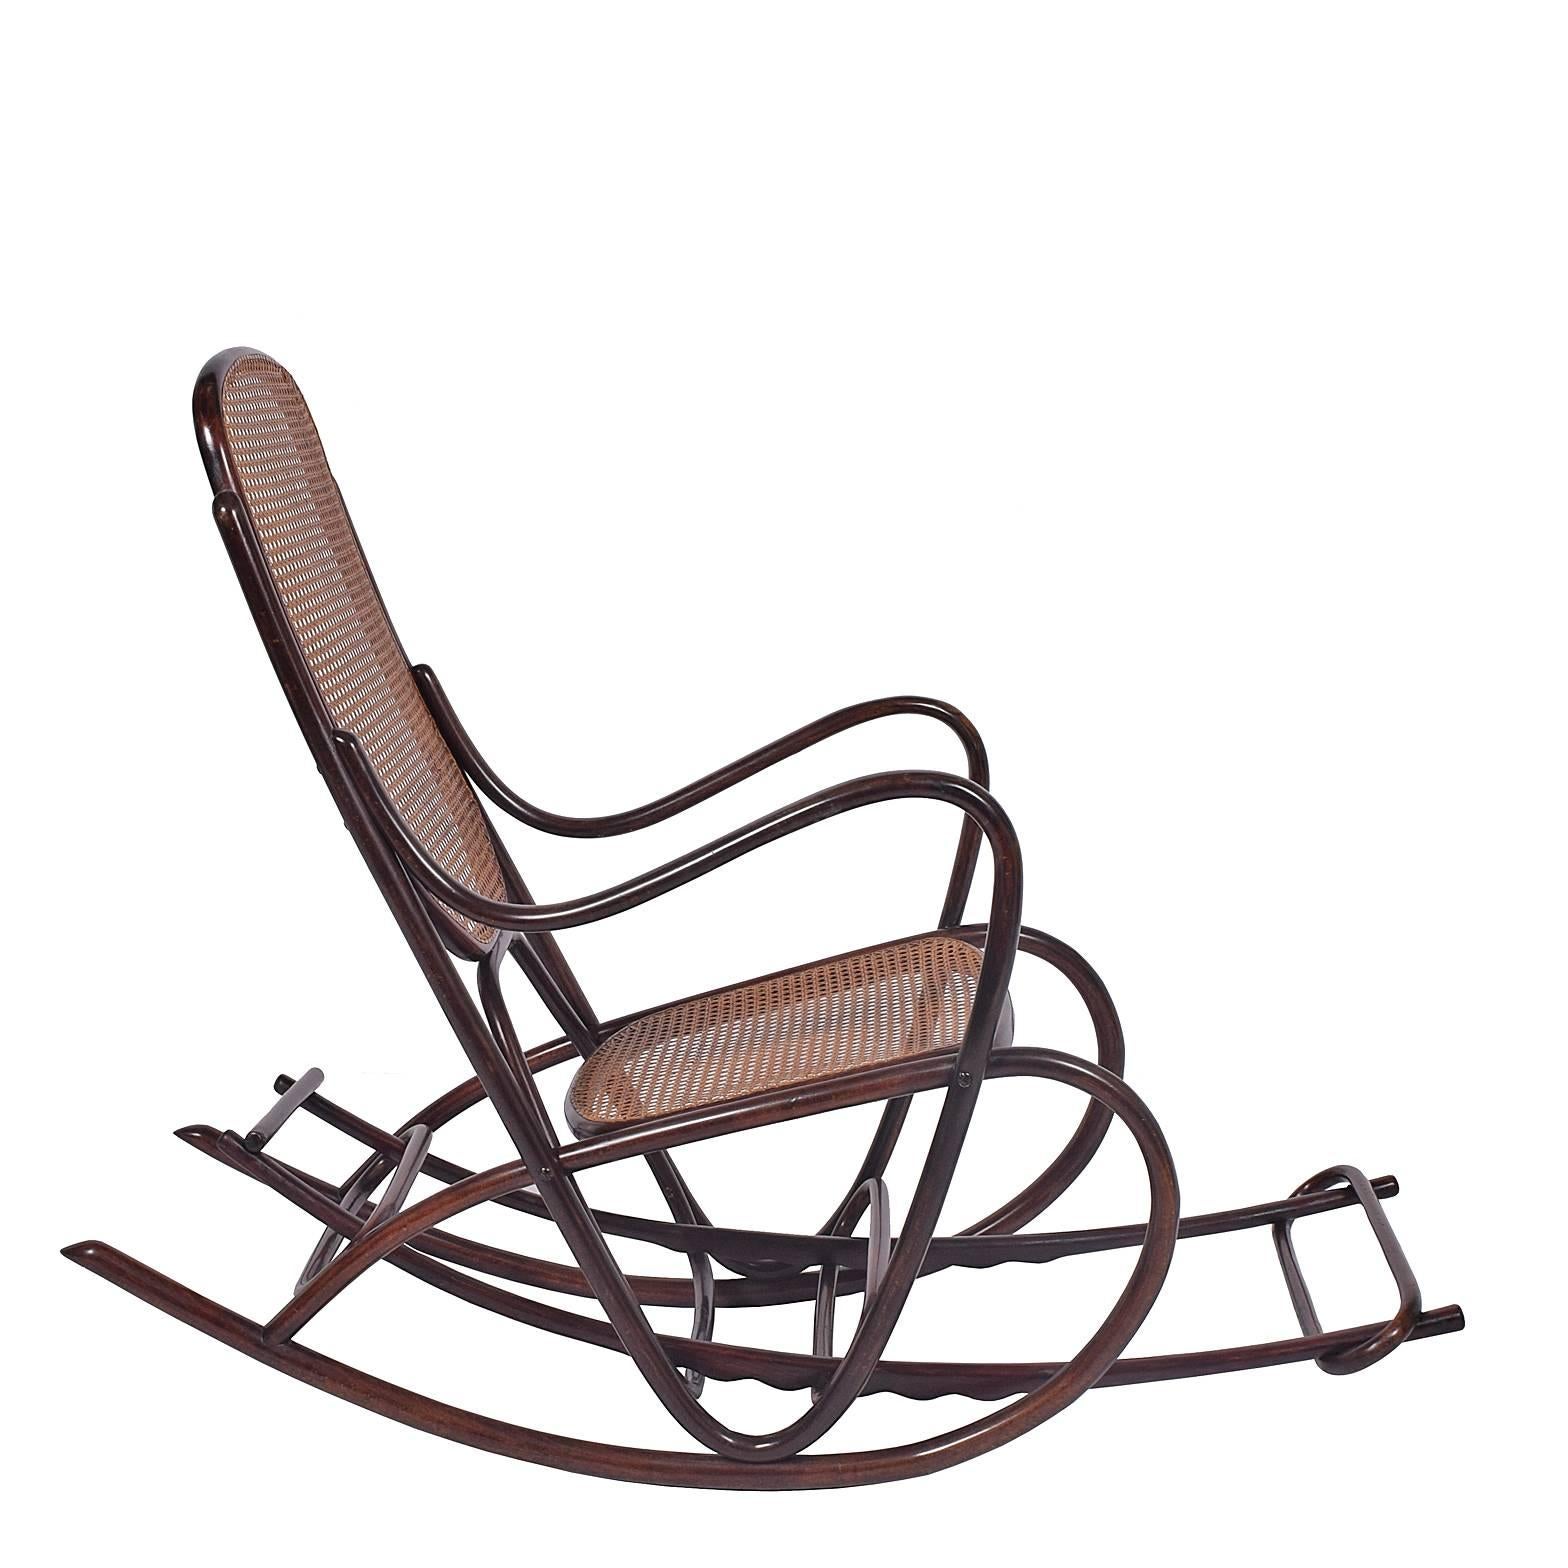 A great example of bentwood furniture. Antonio Volpe was a very early Thonet retailer in the 19th century. In the late 1800s Volpe started his own production of bentwood furniture in Udine, Italy. Comes with foot support.